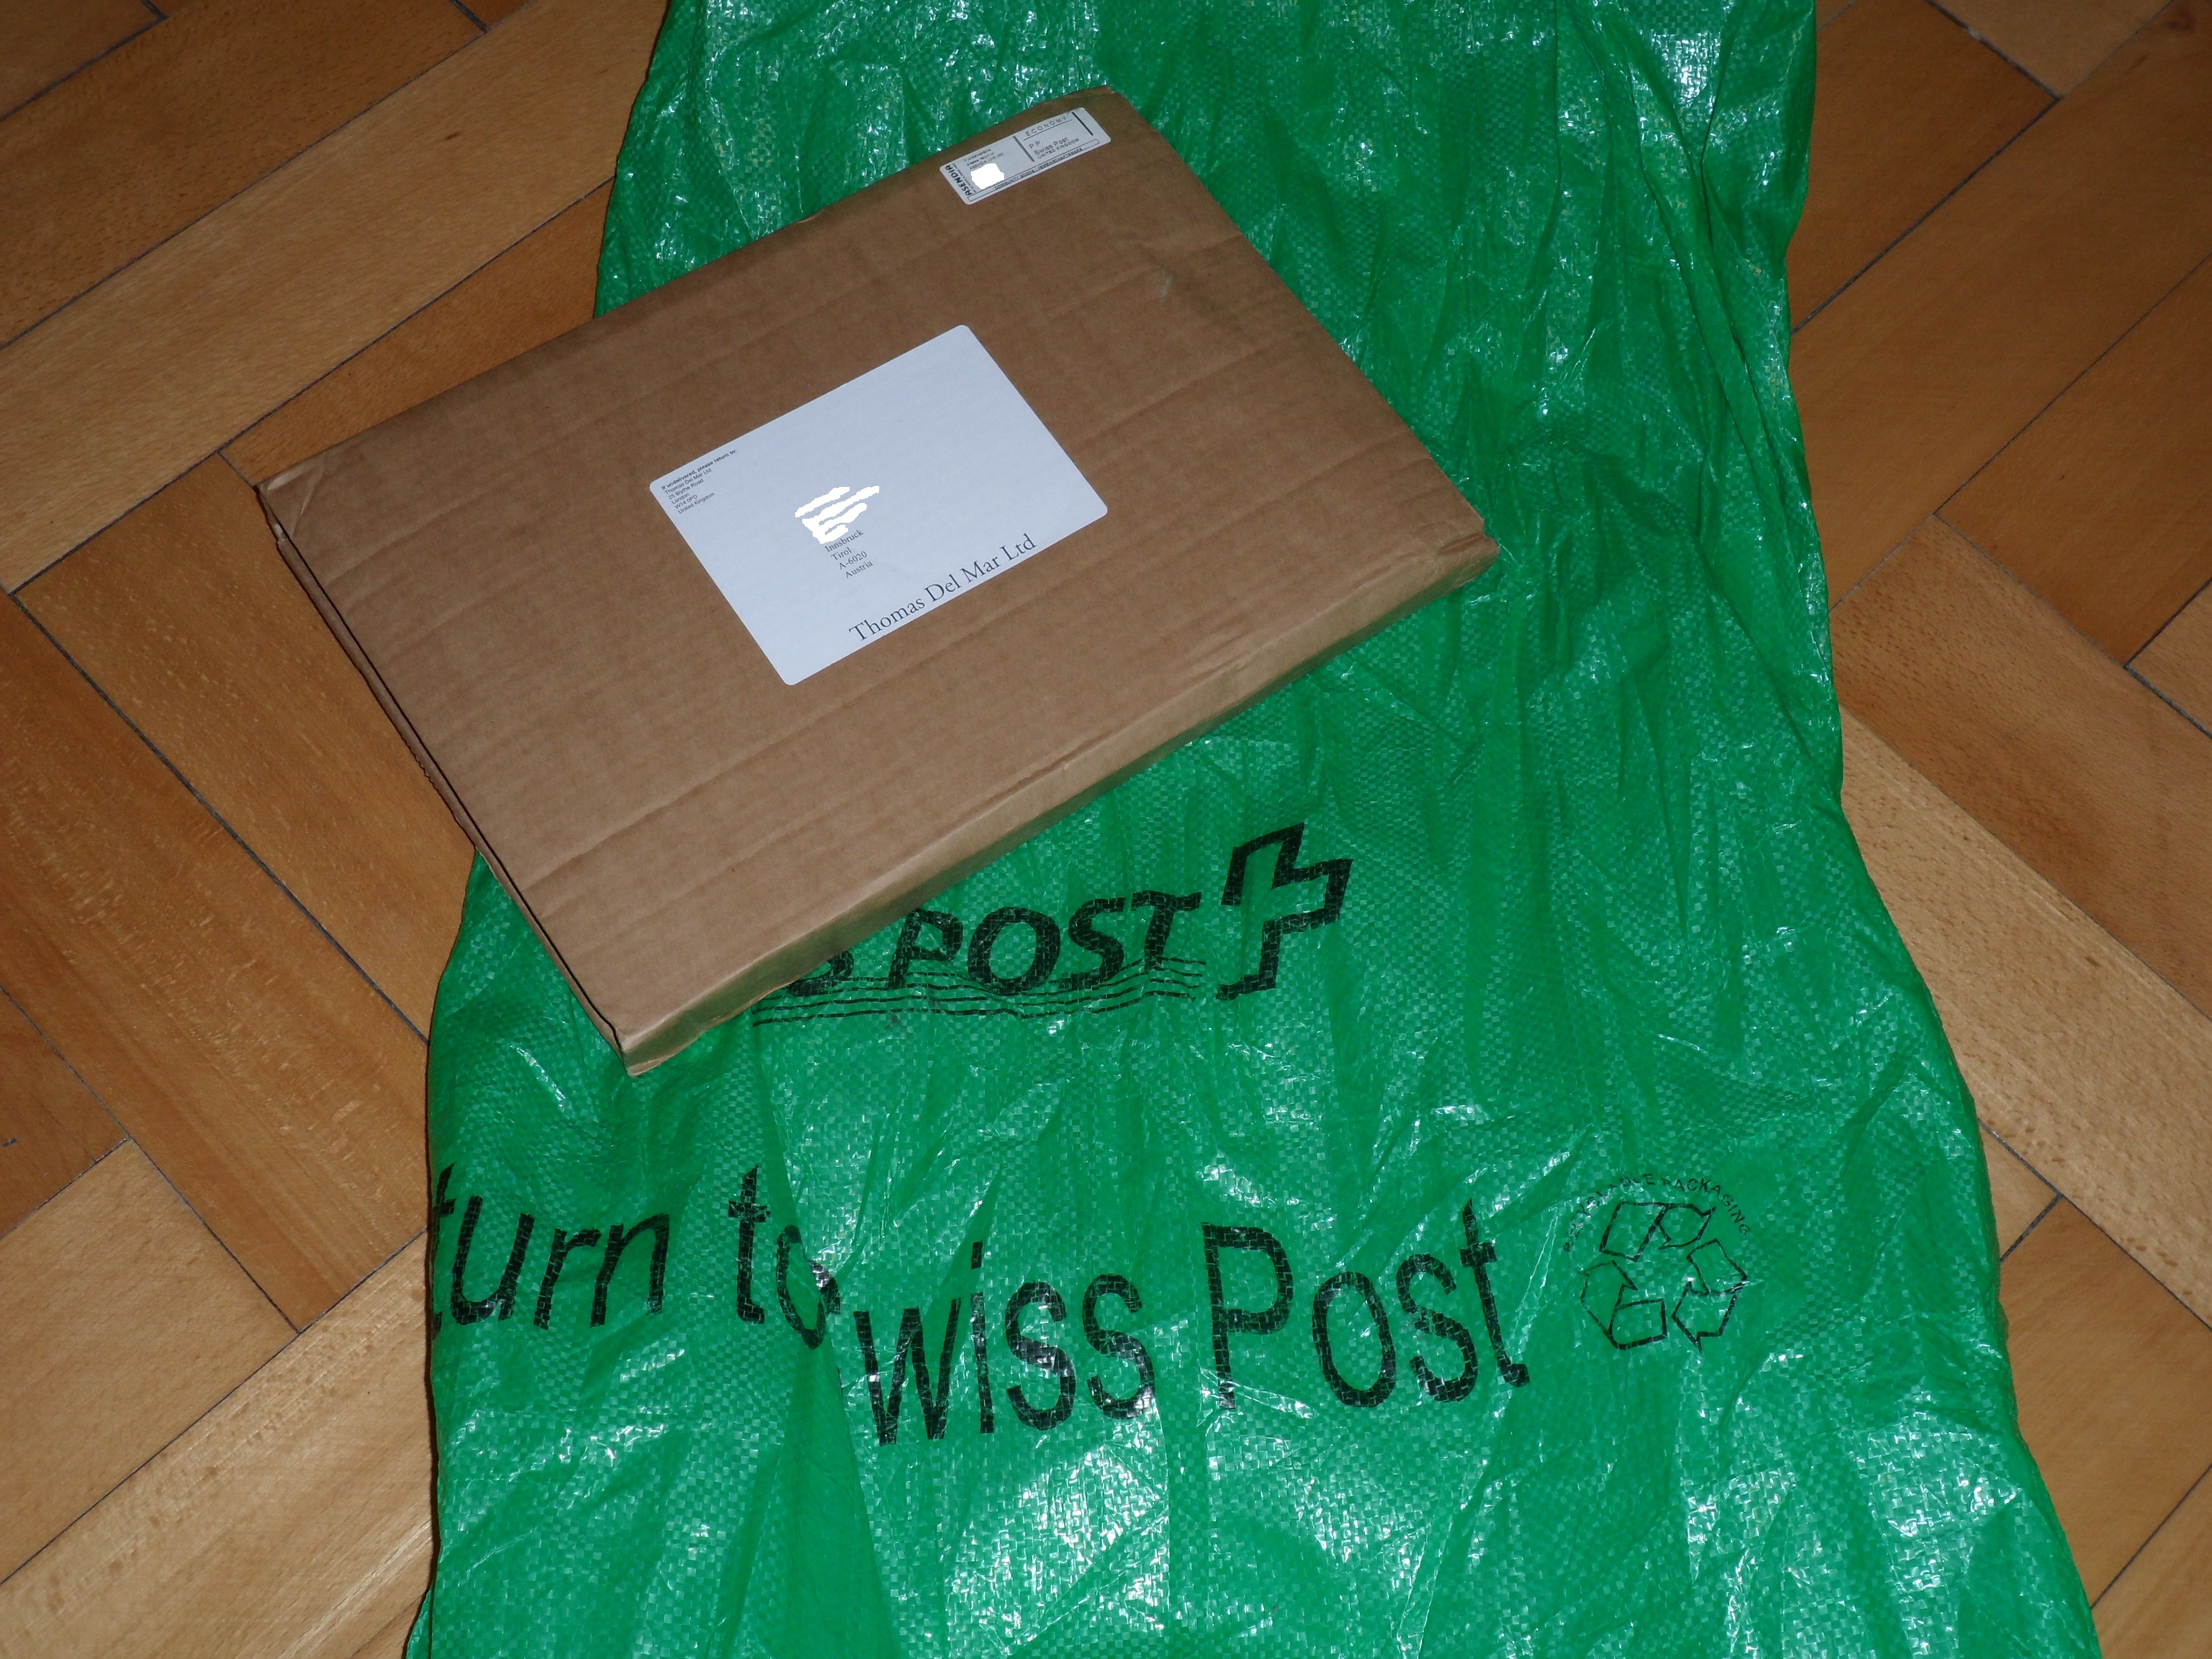 A folding slip of corrugated cardboard with a printed label carrying the address, over a green nylon bag a metre long and 50 cm wide labeled Swiss Post